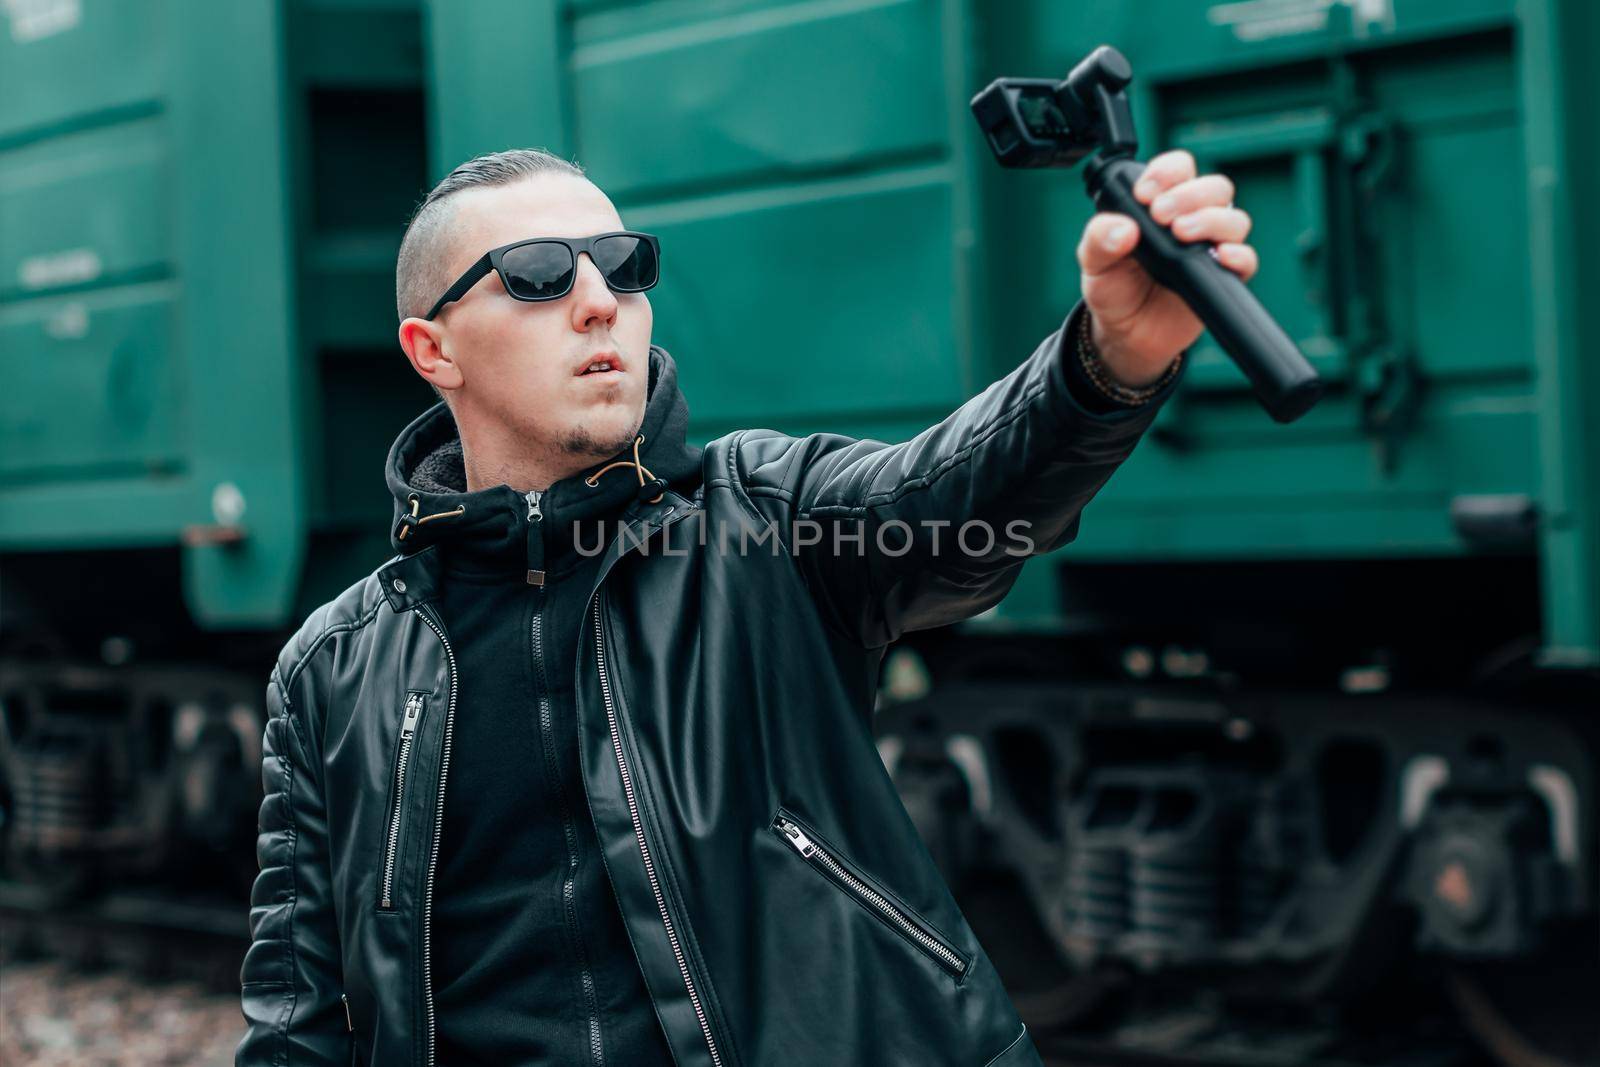 Handsome Guy in Black Clothes and Sunglasses Making Selfie or Streaming Video Using Action Camera with Gimbal Camera Stabilizer at Railway